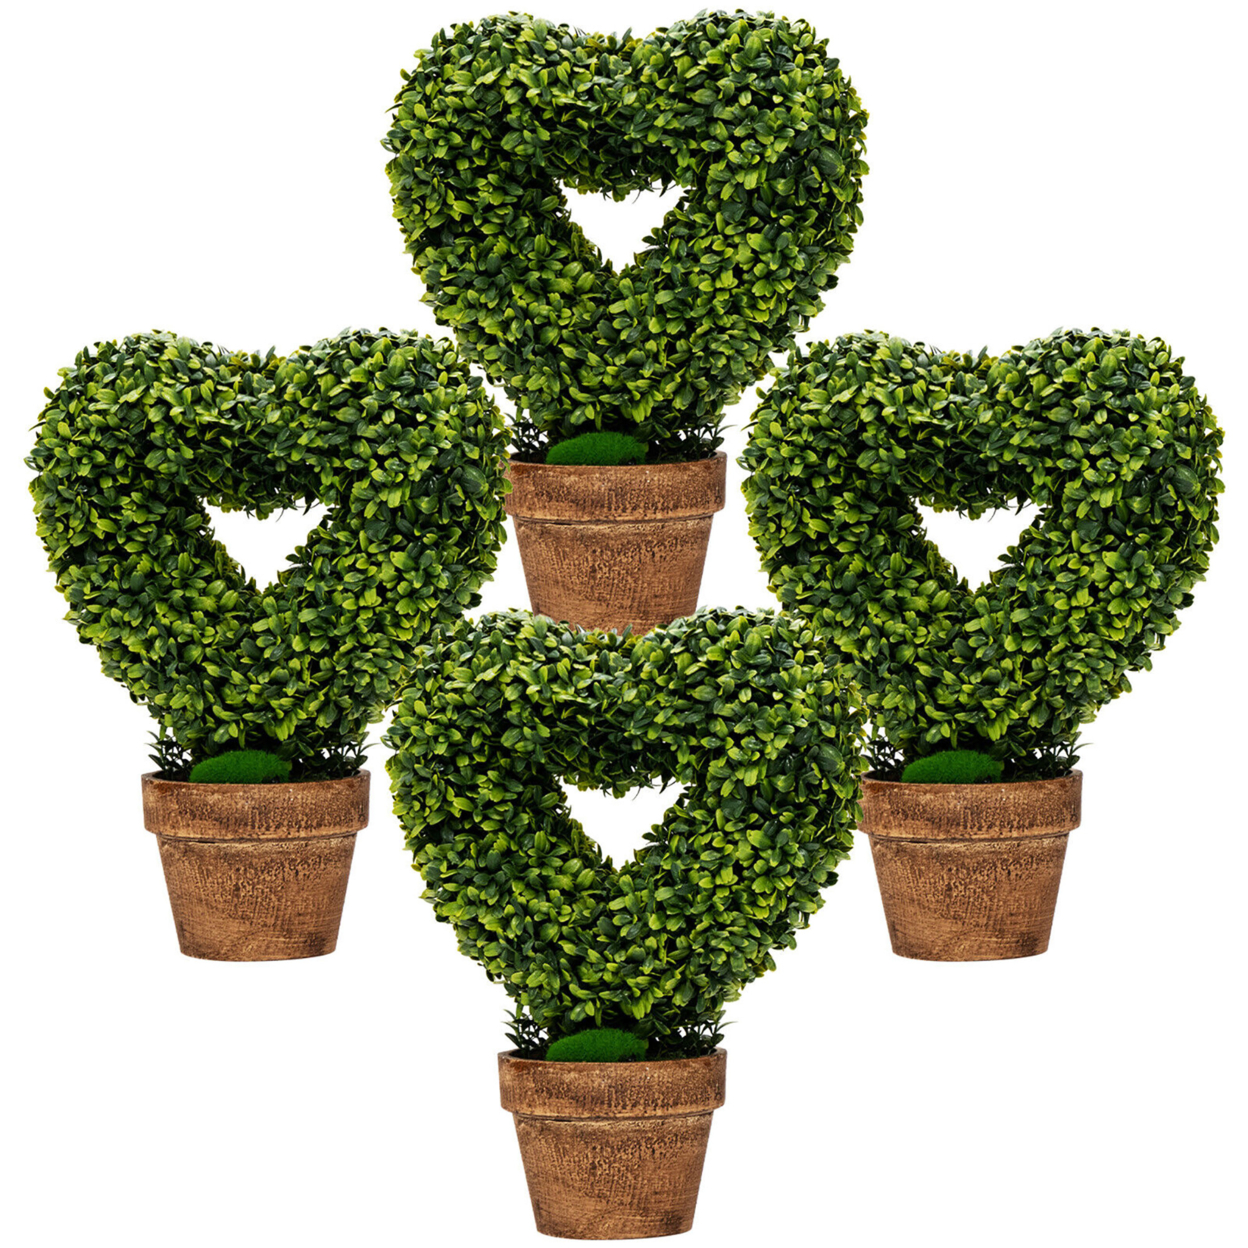 4 Packs Artificial Plants Artificial Potted Plants Mini Fake Potted Plants